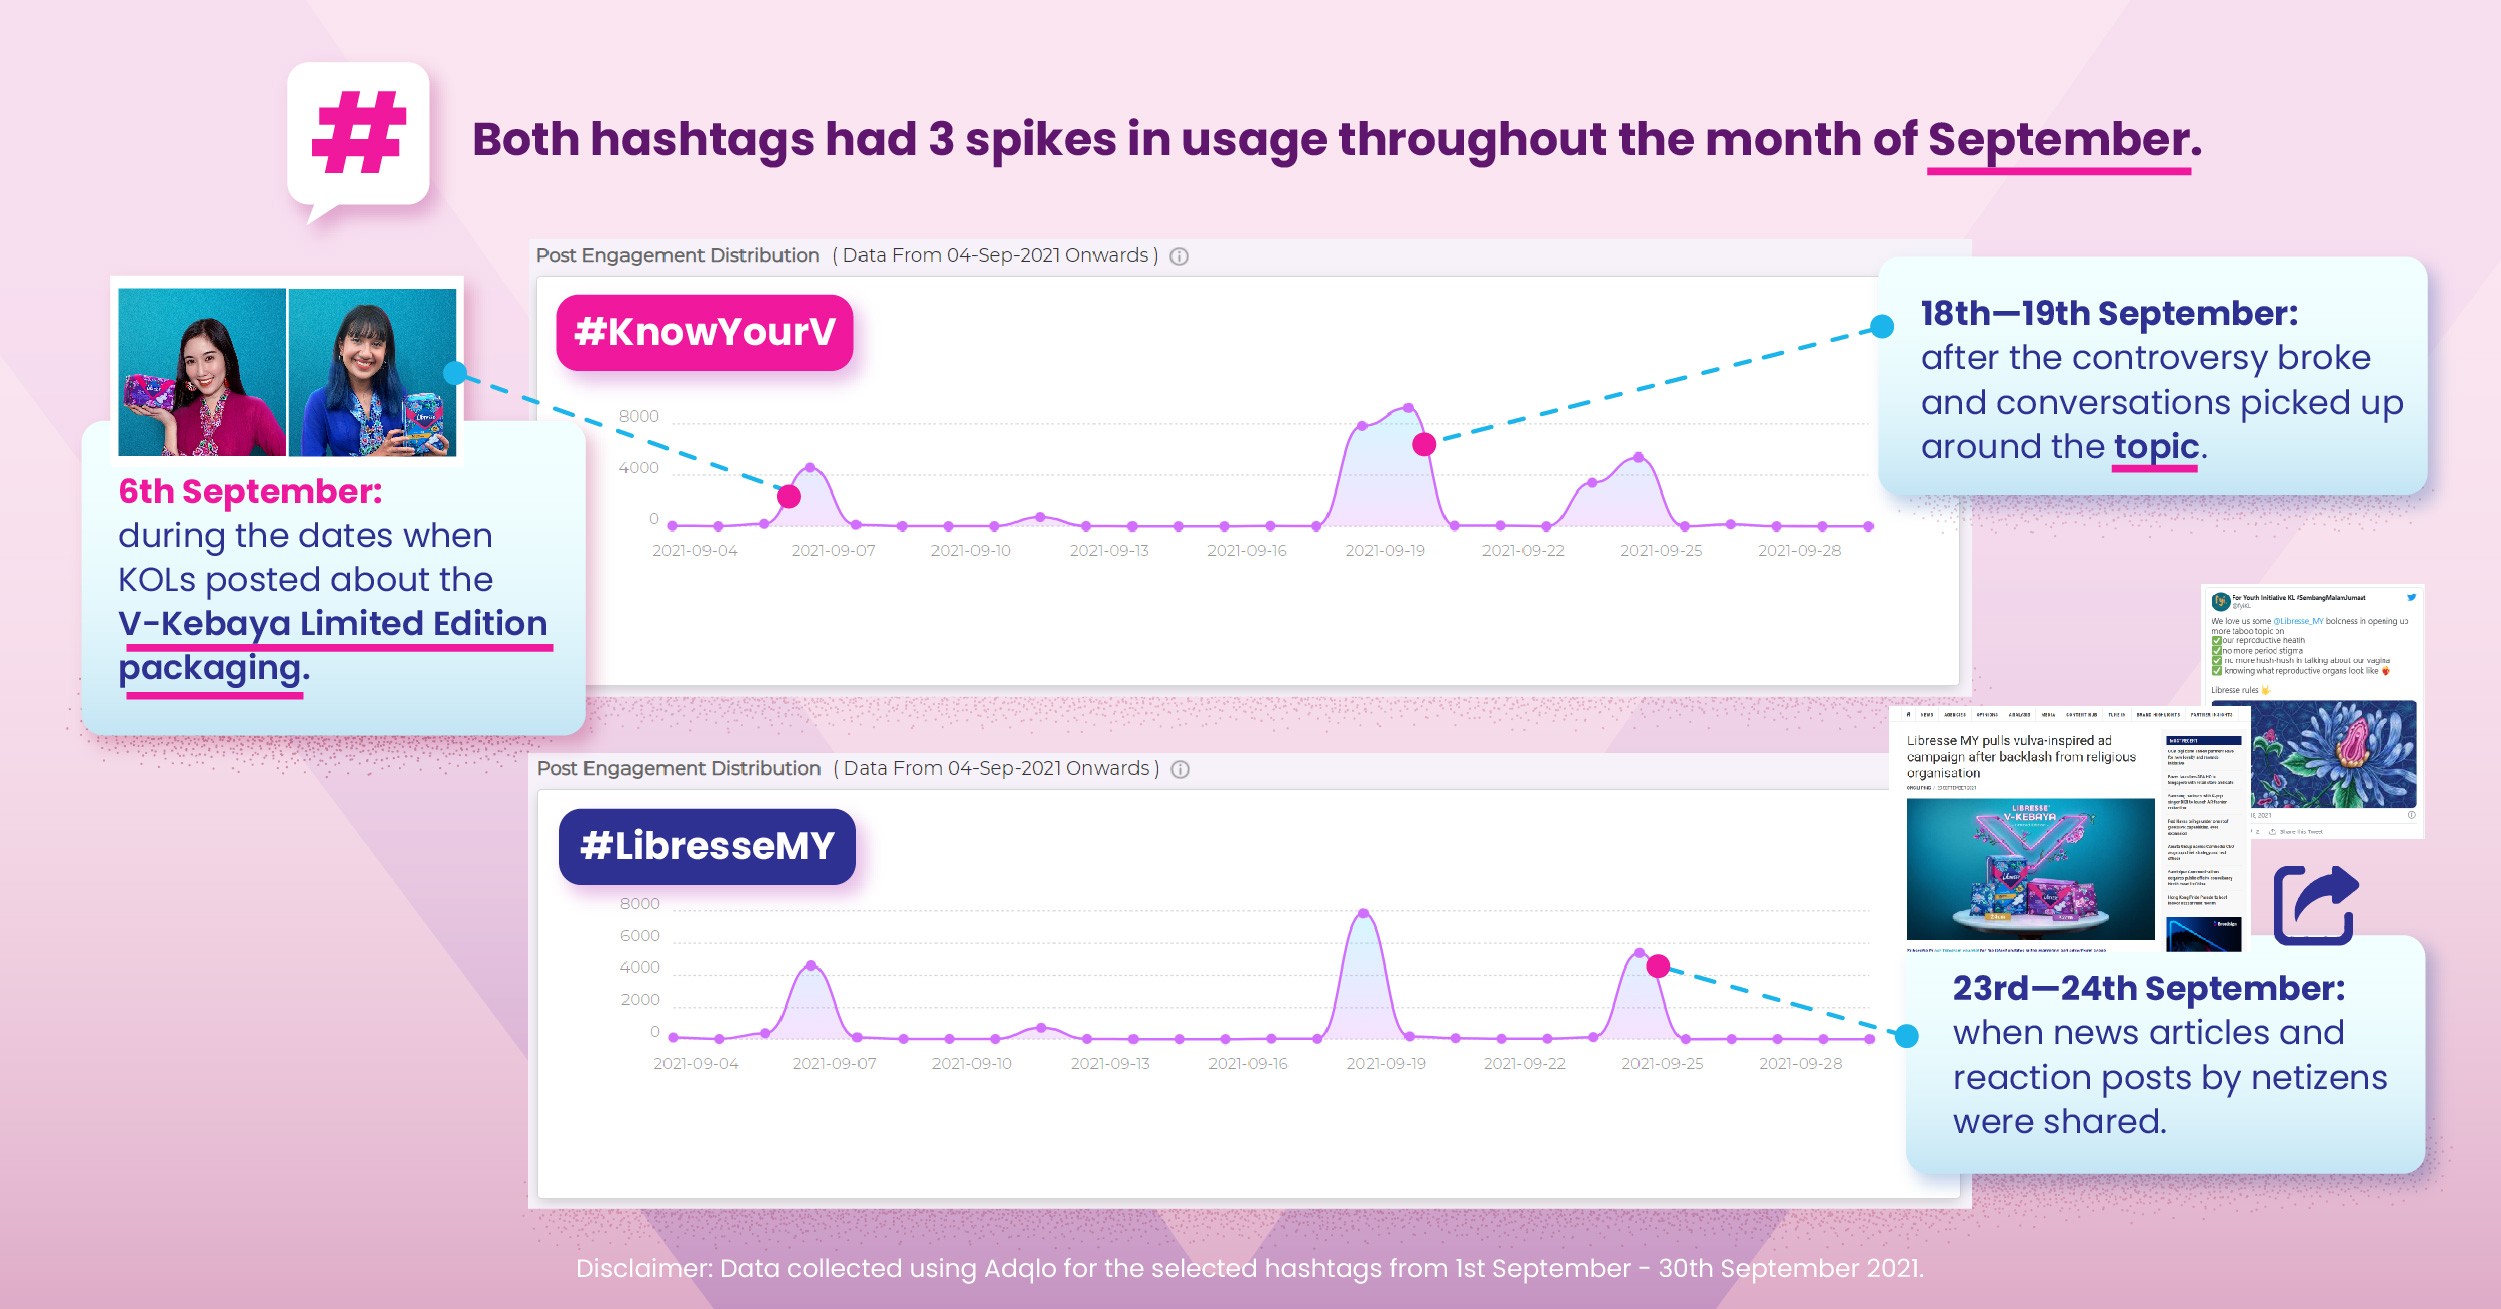 Graph depicting usage of the hashtags #LibresseMY and #KnowYourV